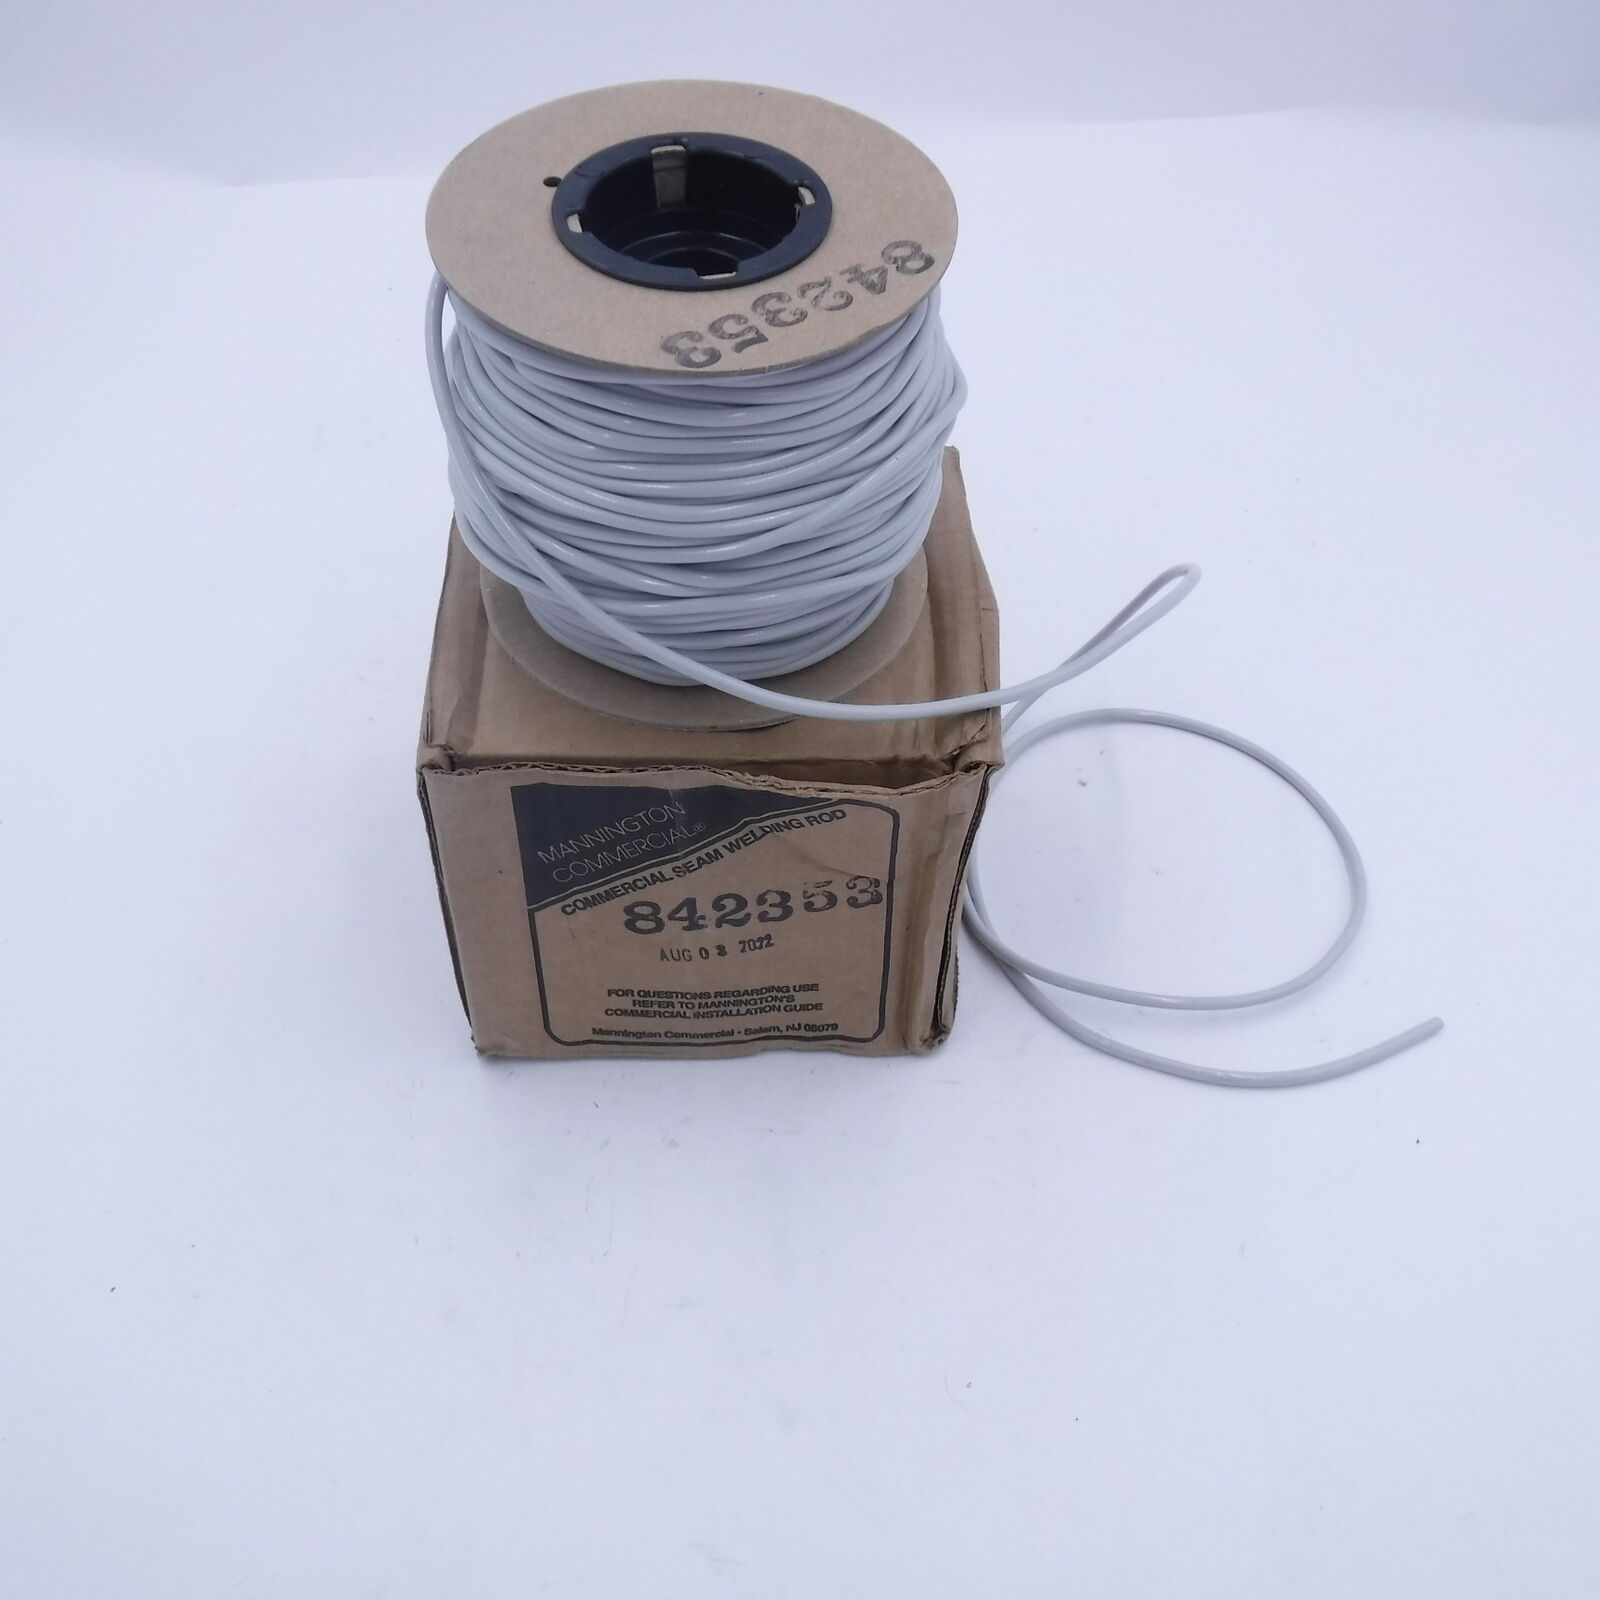 165' Spool Manning Commercial Seam Welding Rod In Glacier 842353